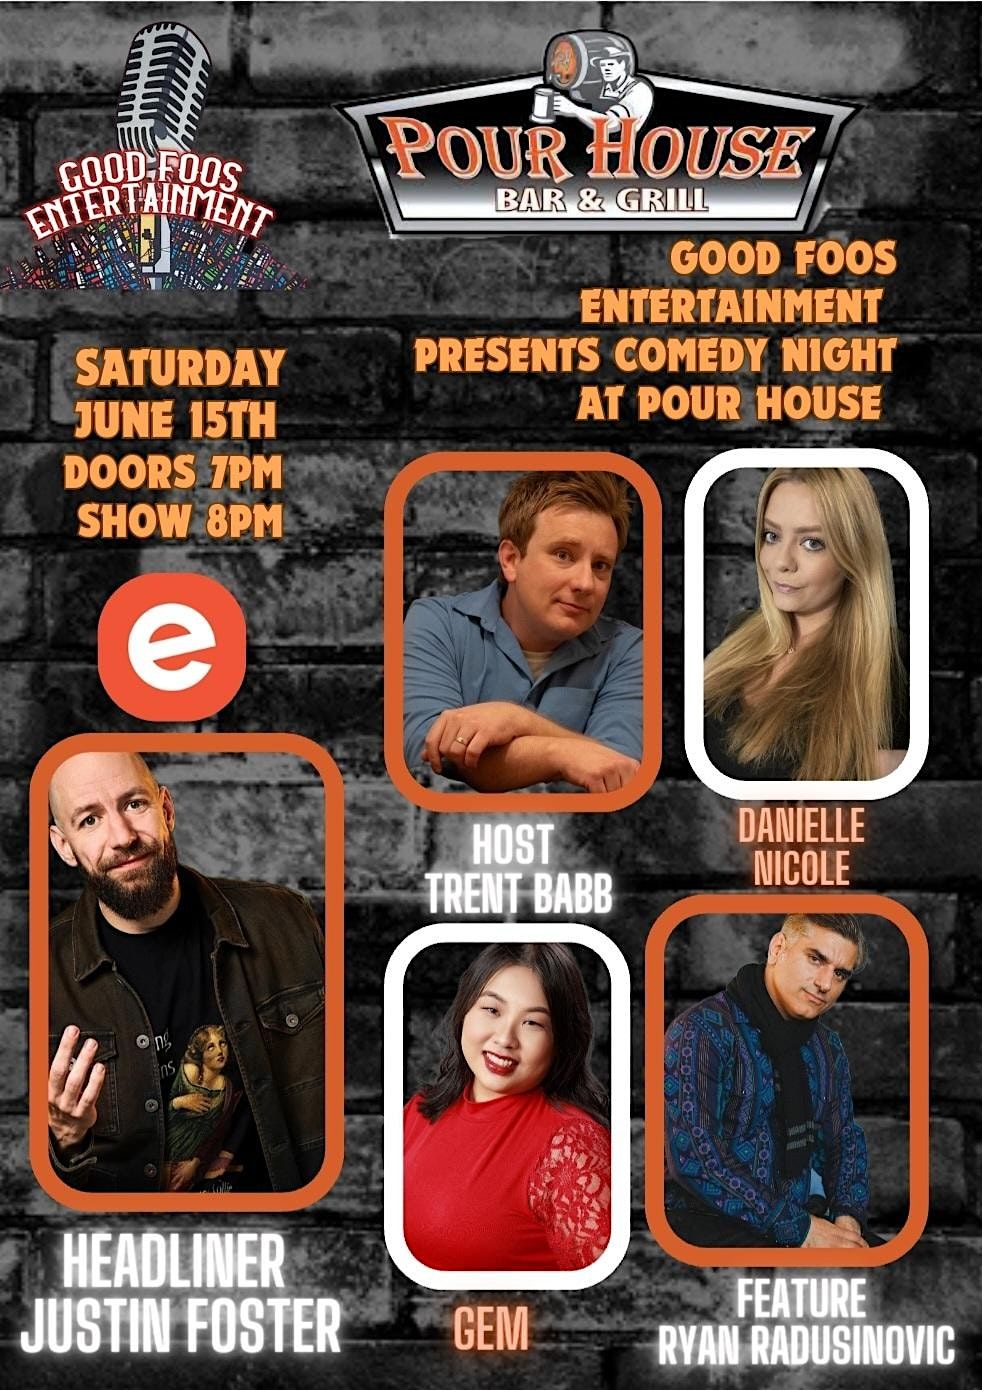 GOOD FOOS ENTERTAINMENT PRESENTS COMEDY AT POUR HOUSE